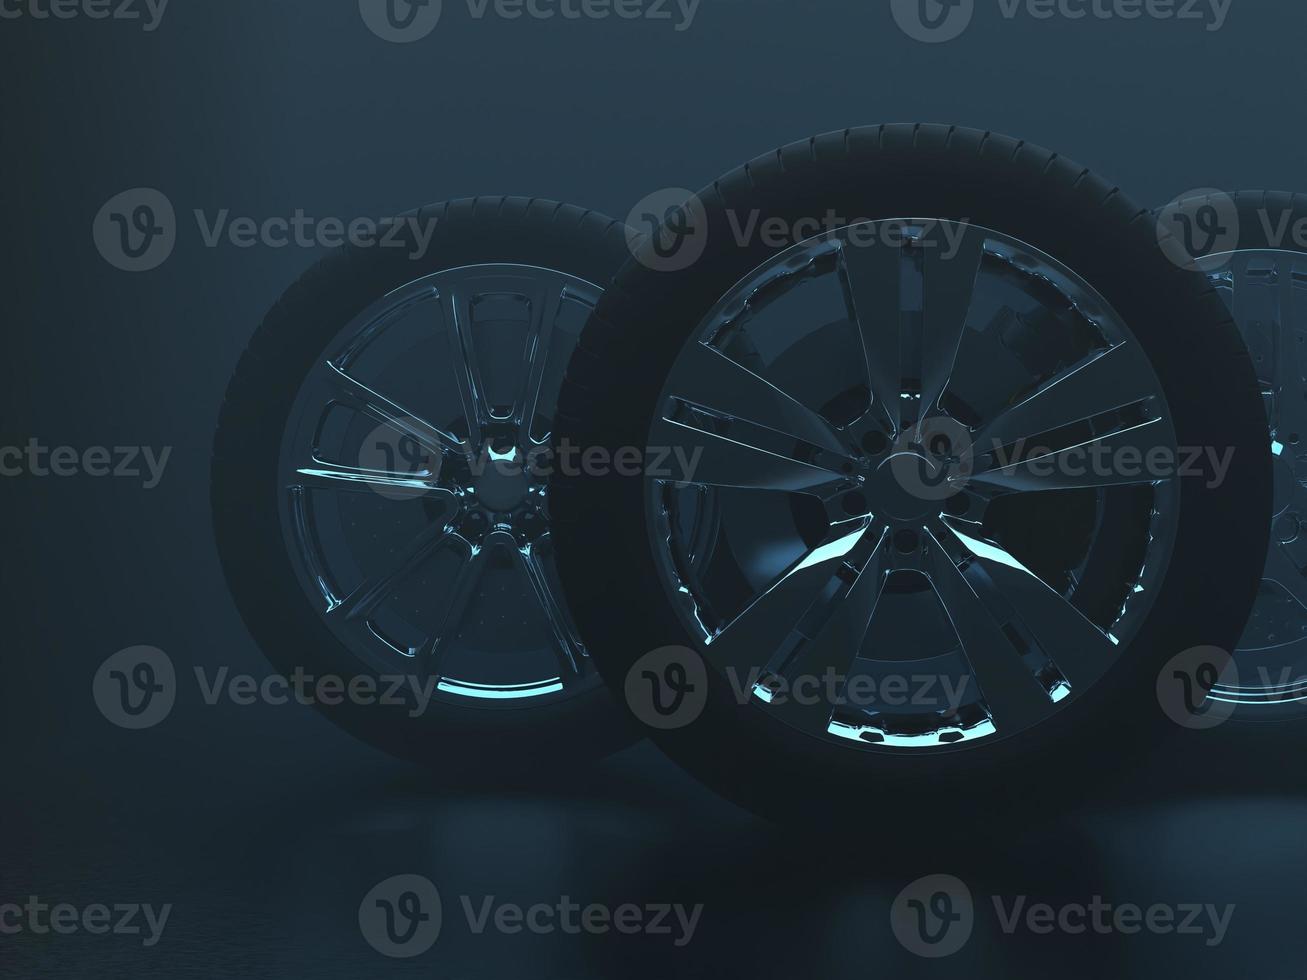 auto wheel with chrome disks close-up on a dark background. 3d render photo